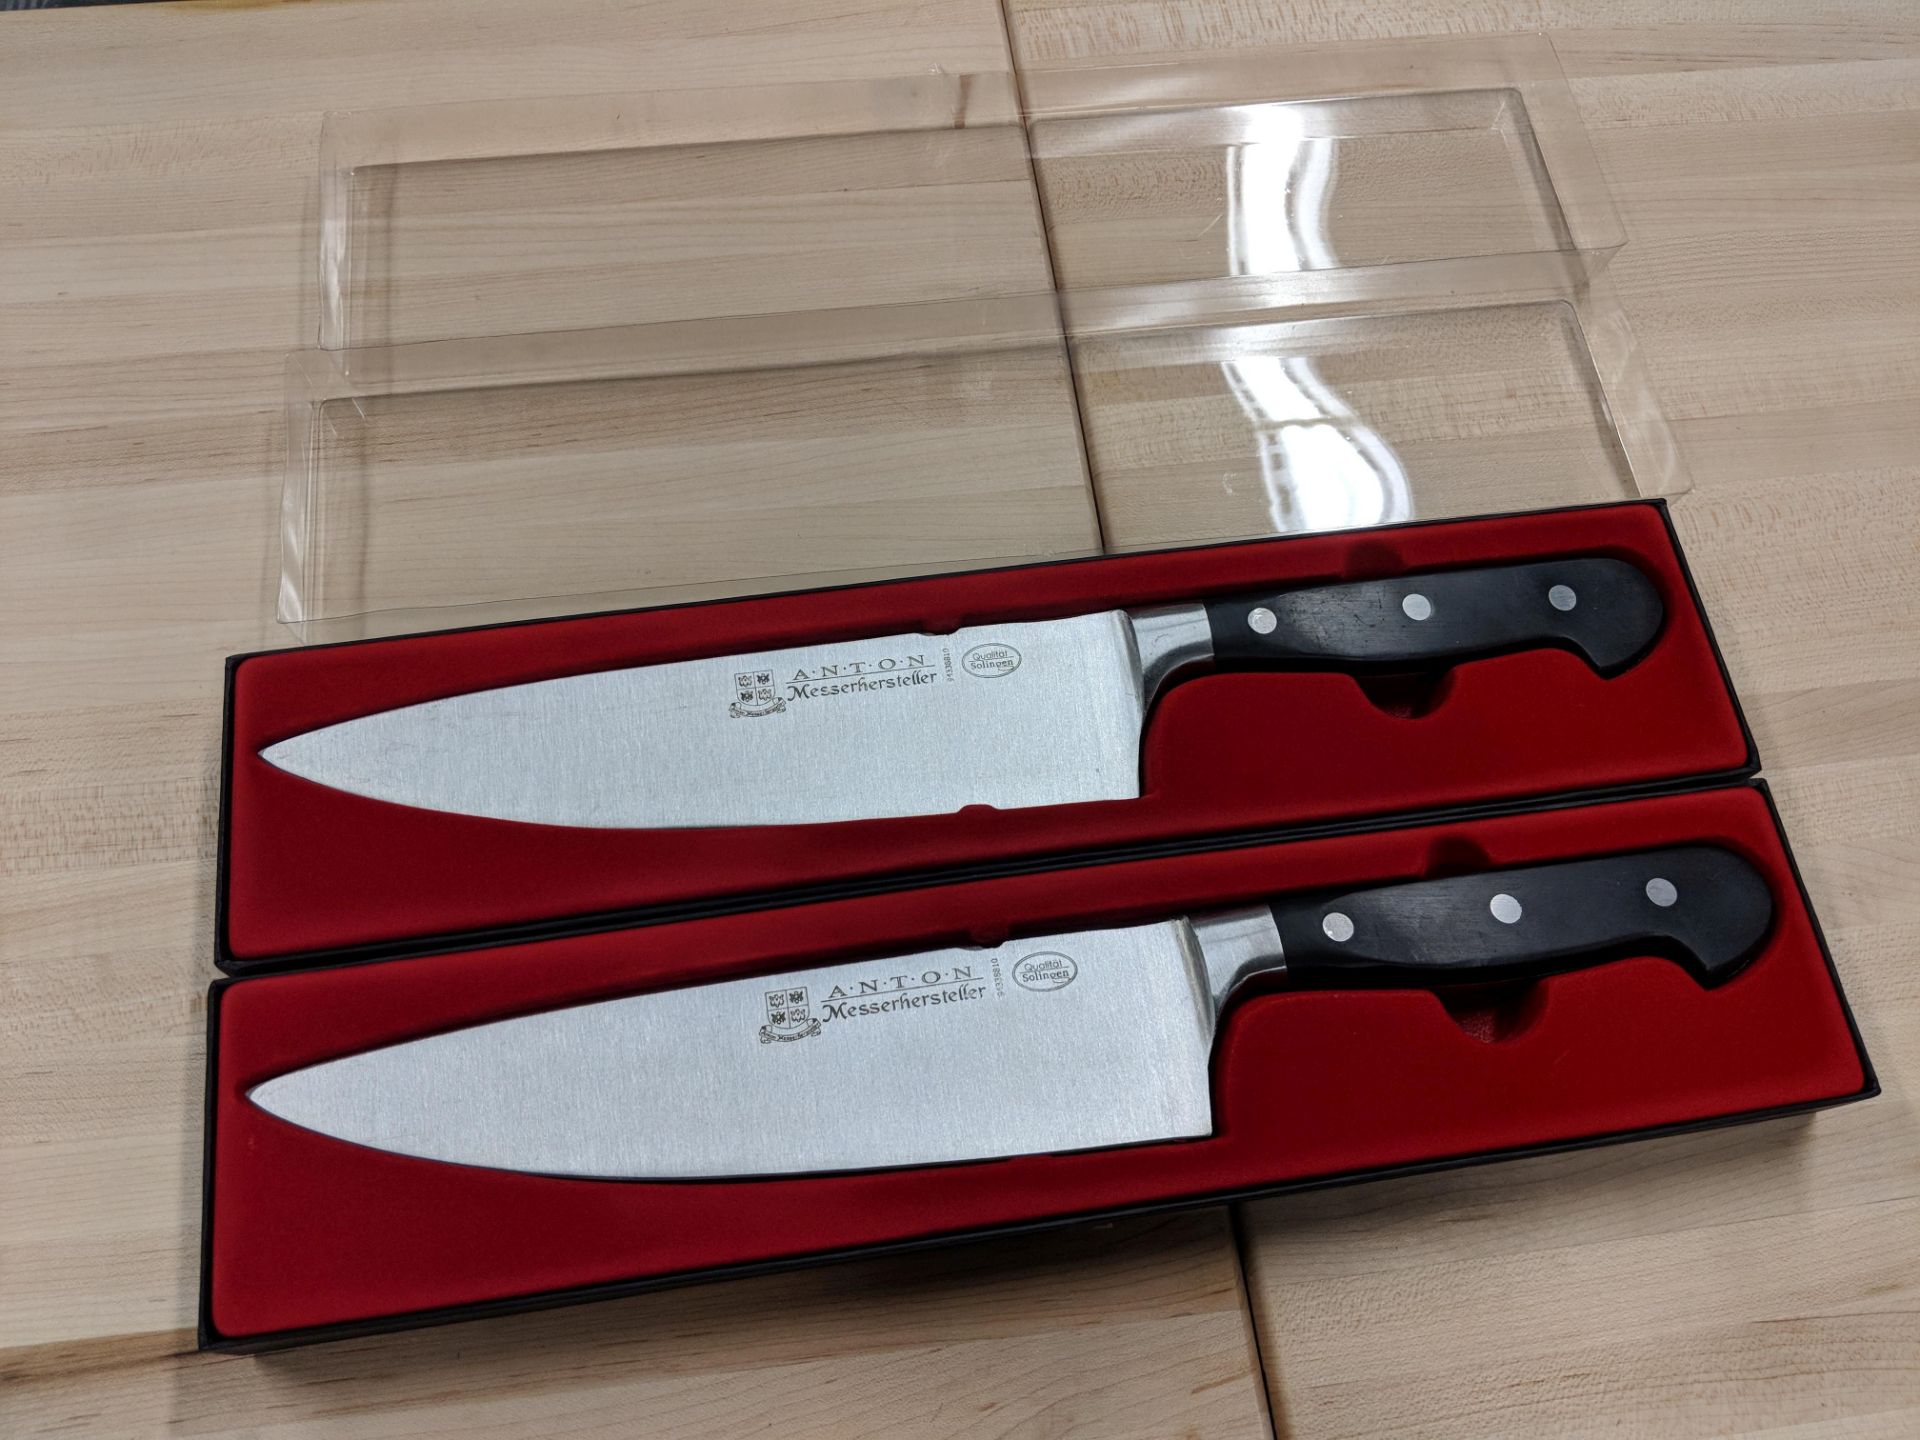 8” Premium Anton Medium Forged Cook's Knives - Lot of 2 - Image 4 of 4